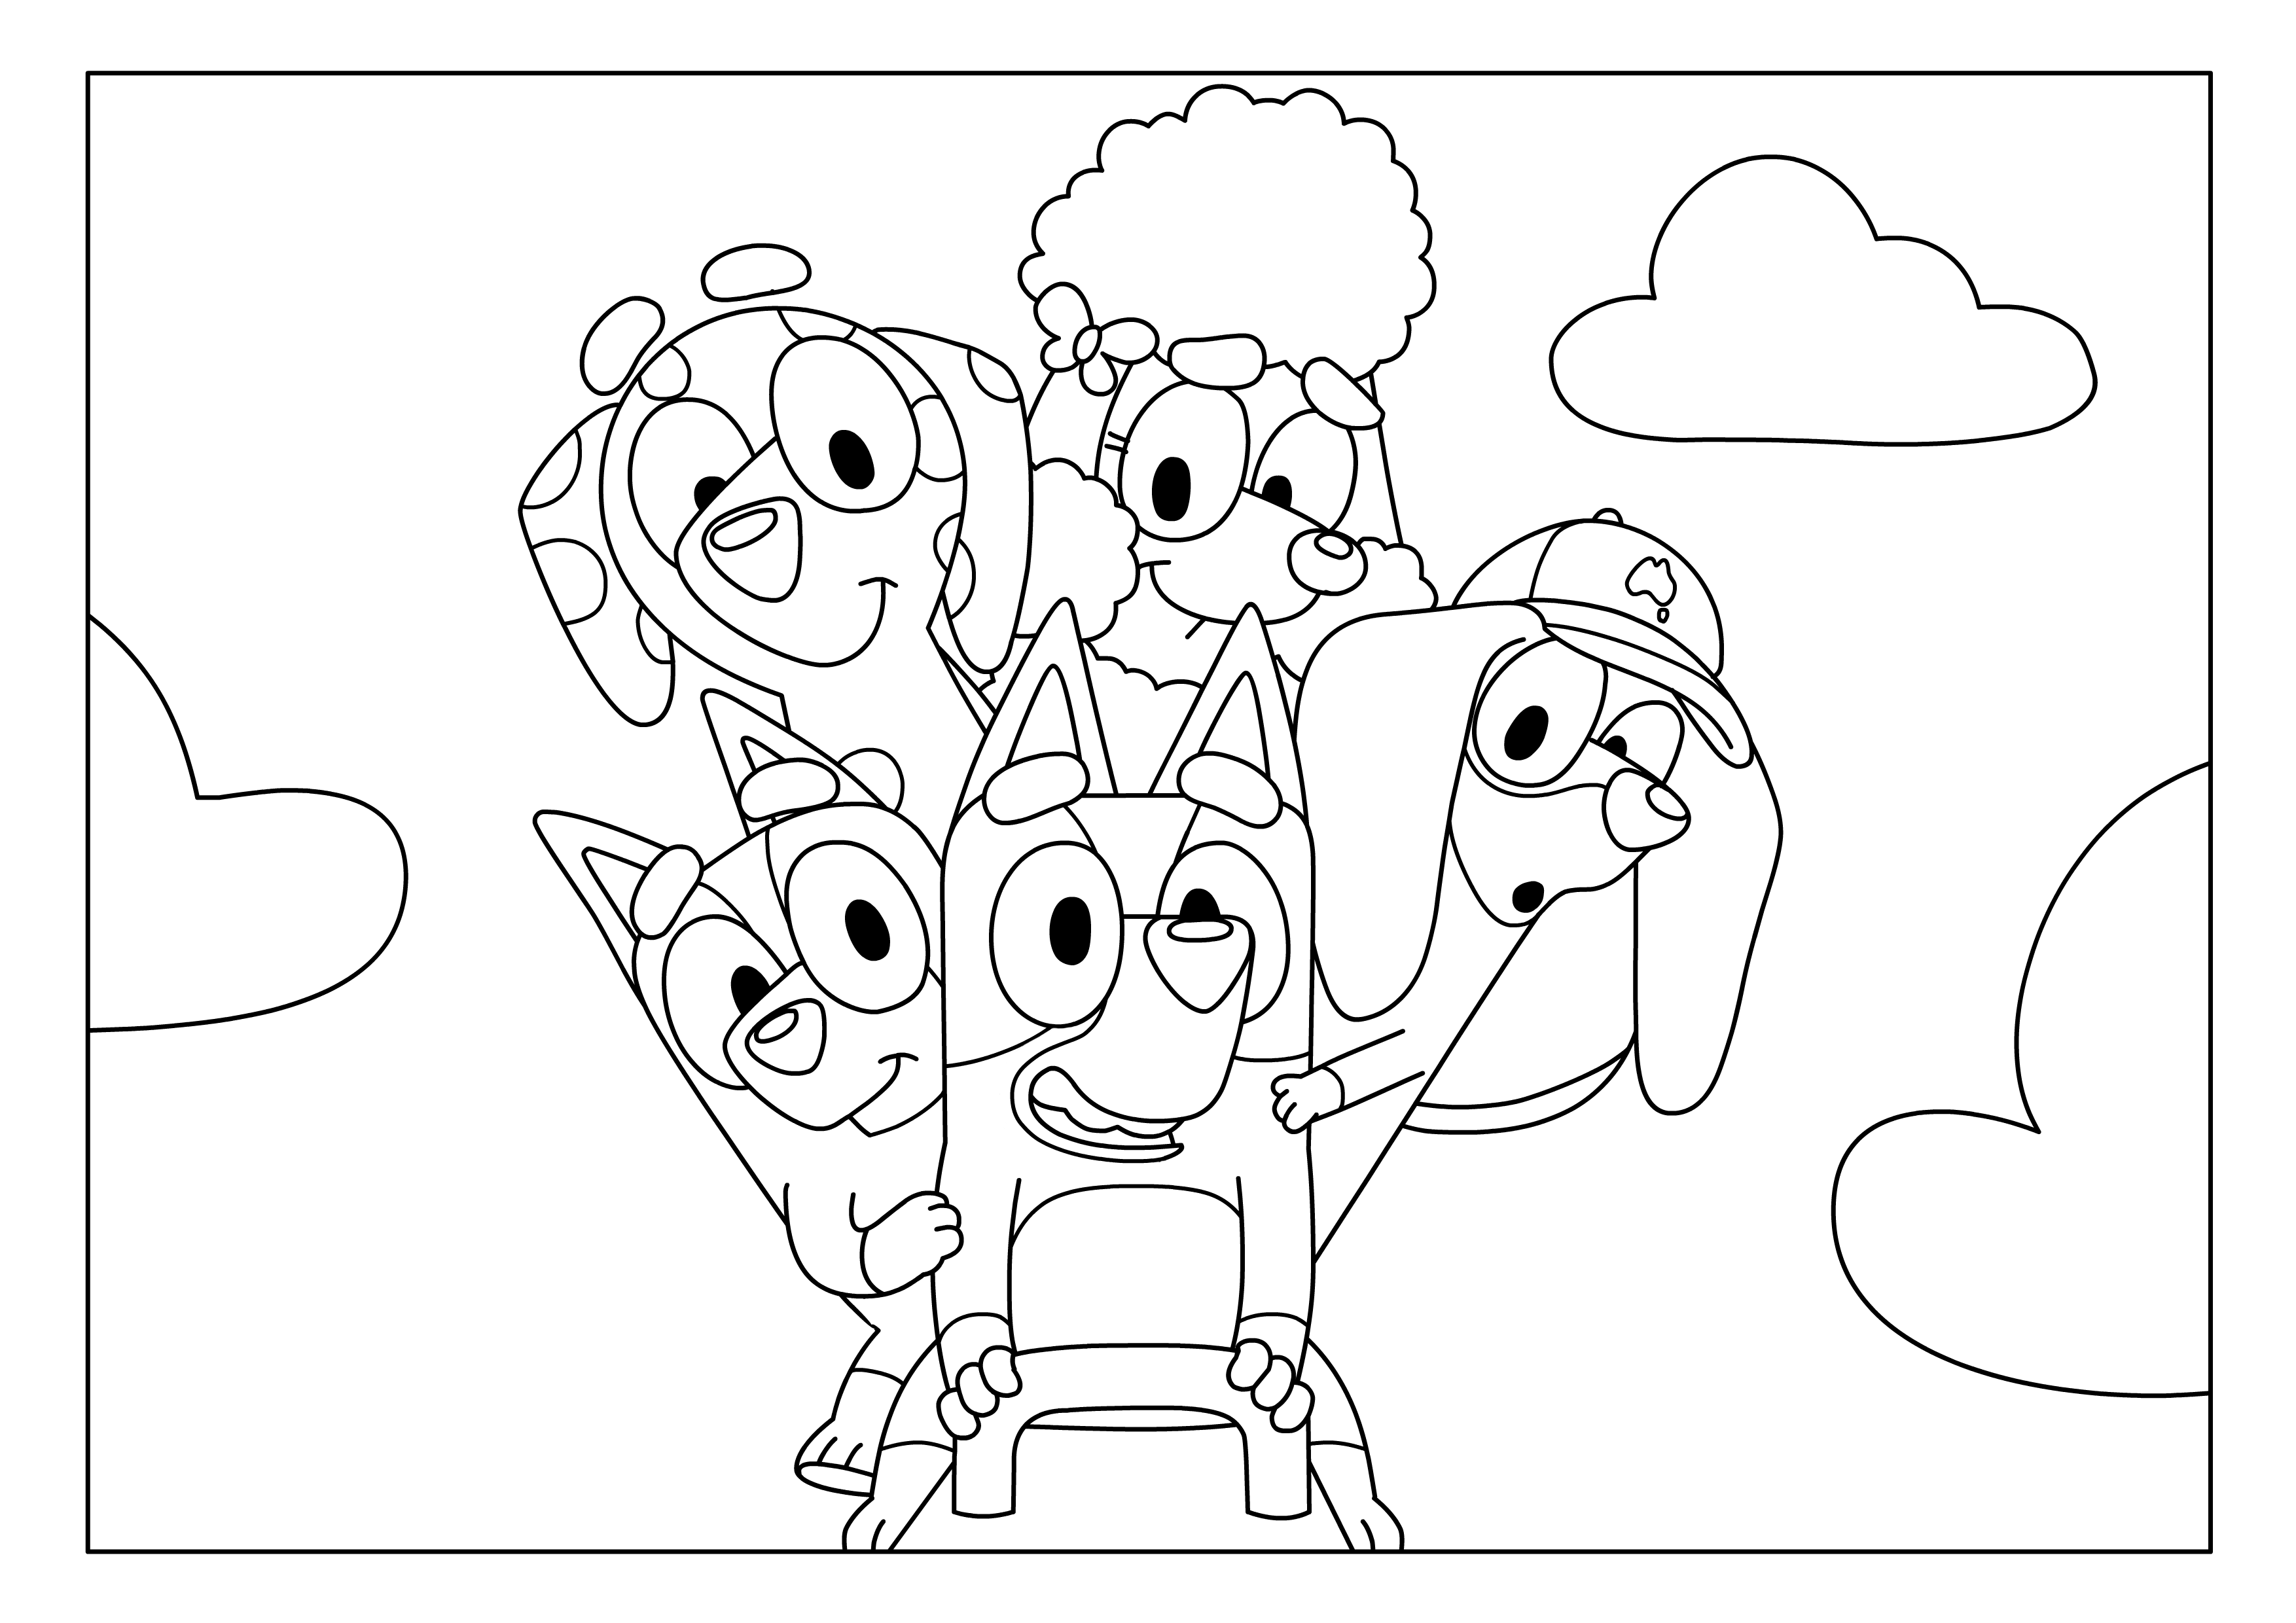 Download or print this amazing coloring page: Bluey friends colouring sheet...